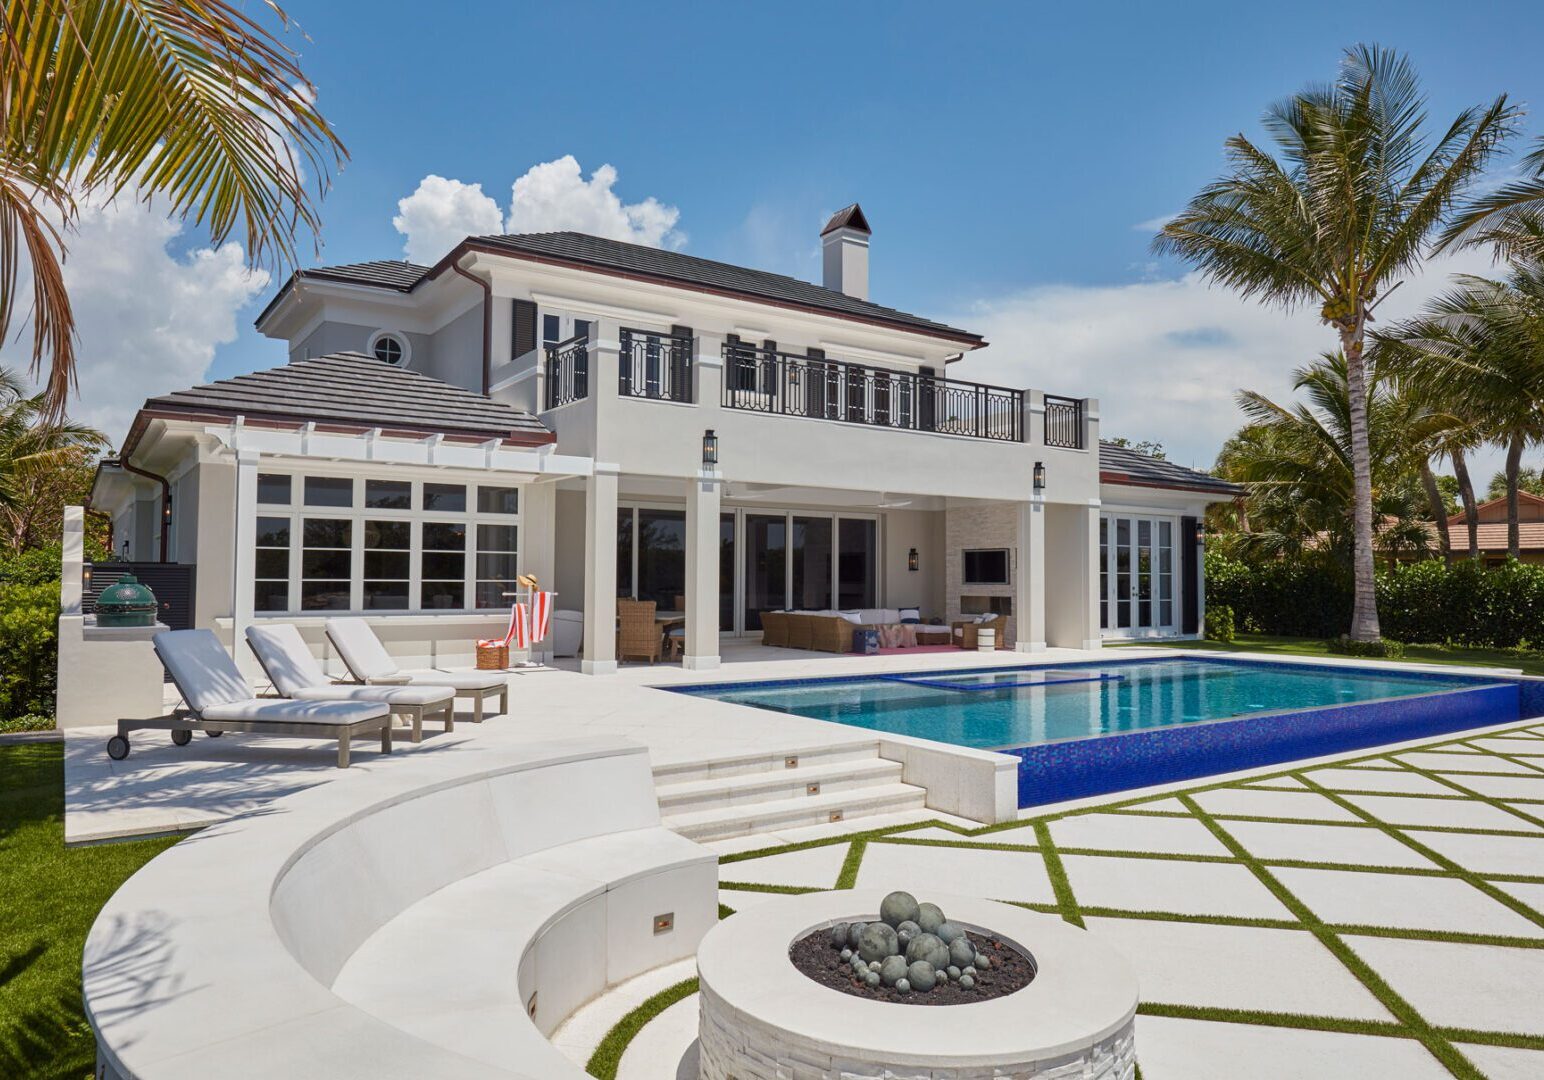 A large white house with pool and fire pit.